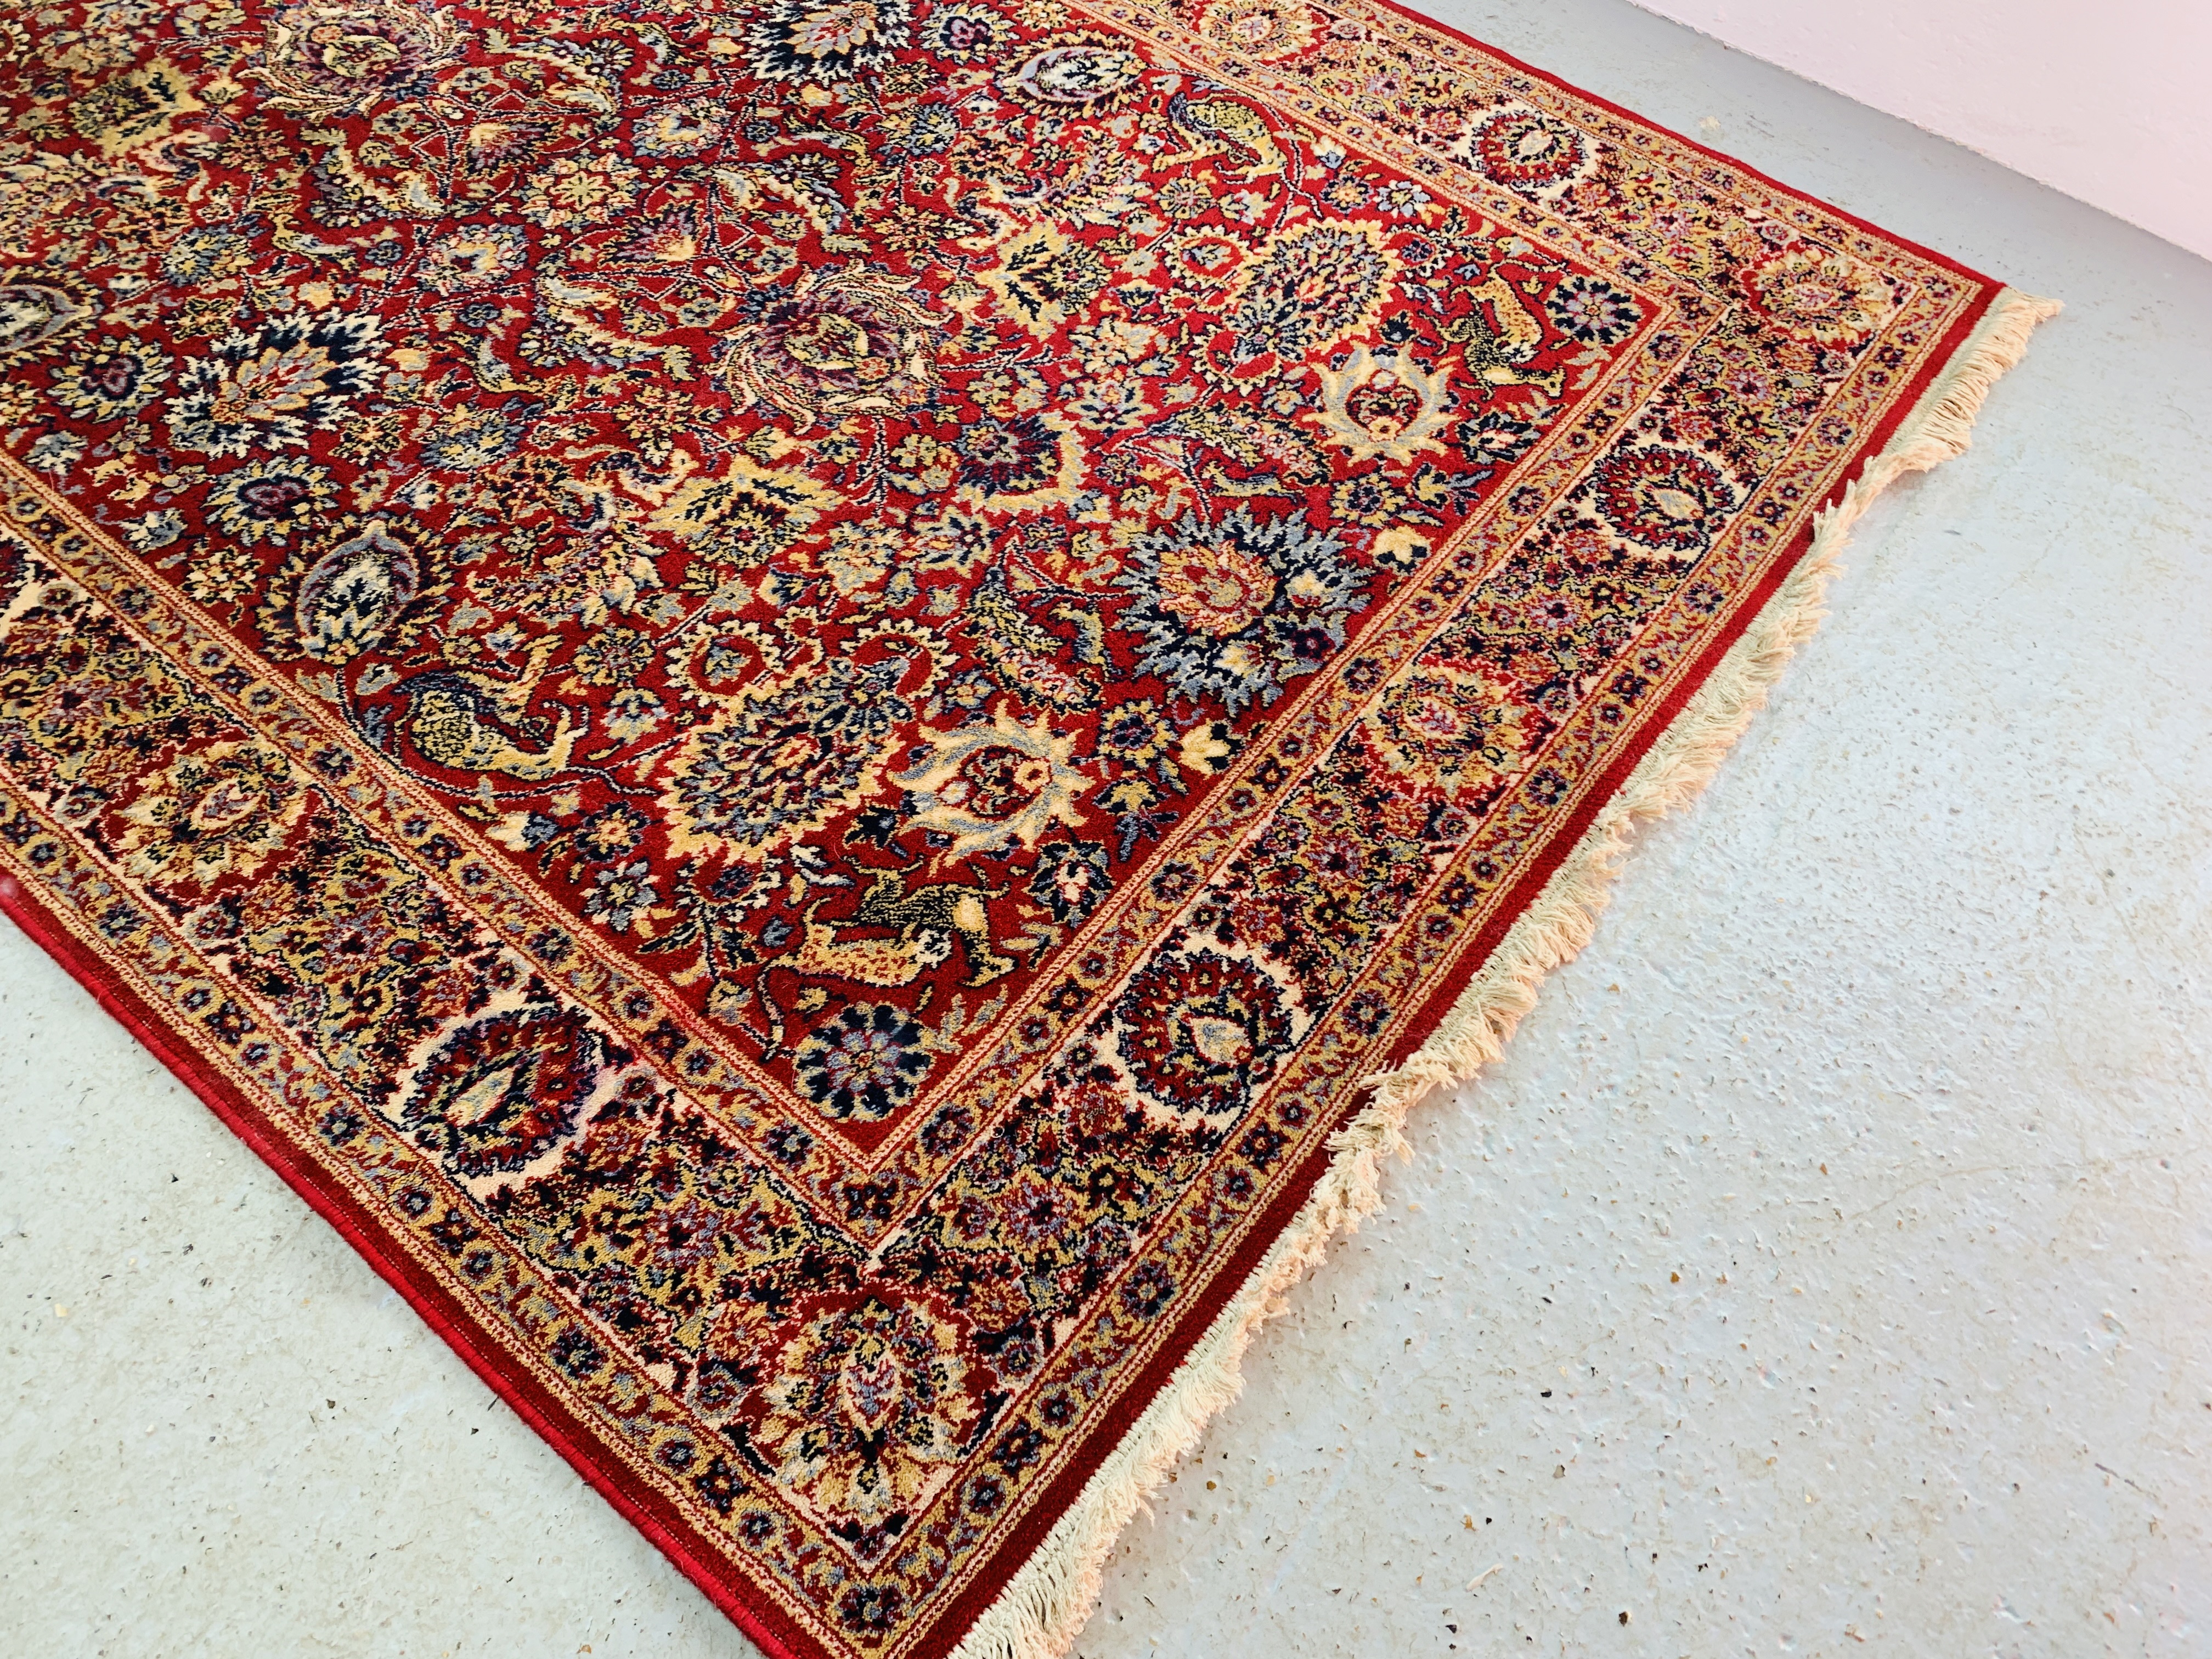 AN ORIENTAL DECORATED RUG 184CM X 92CM AND MODERN MACHINE MADE KEESHAN RED PATTERNED RUG 197 X - Image 4 of 11